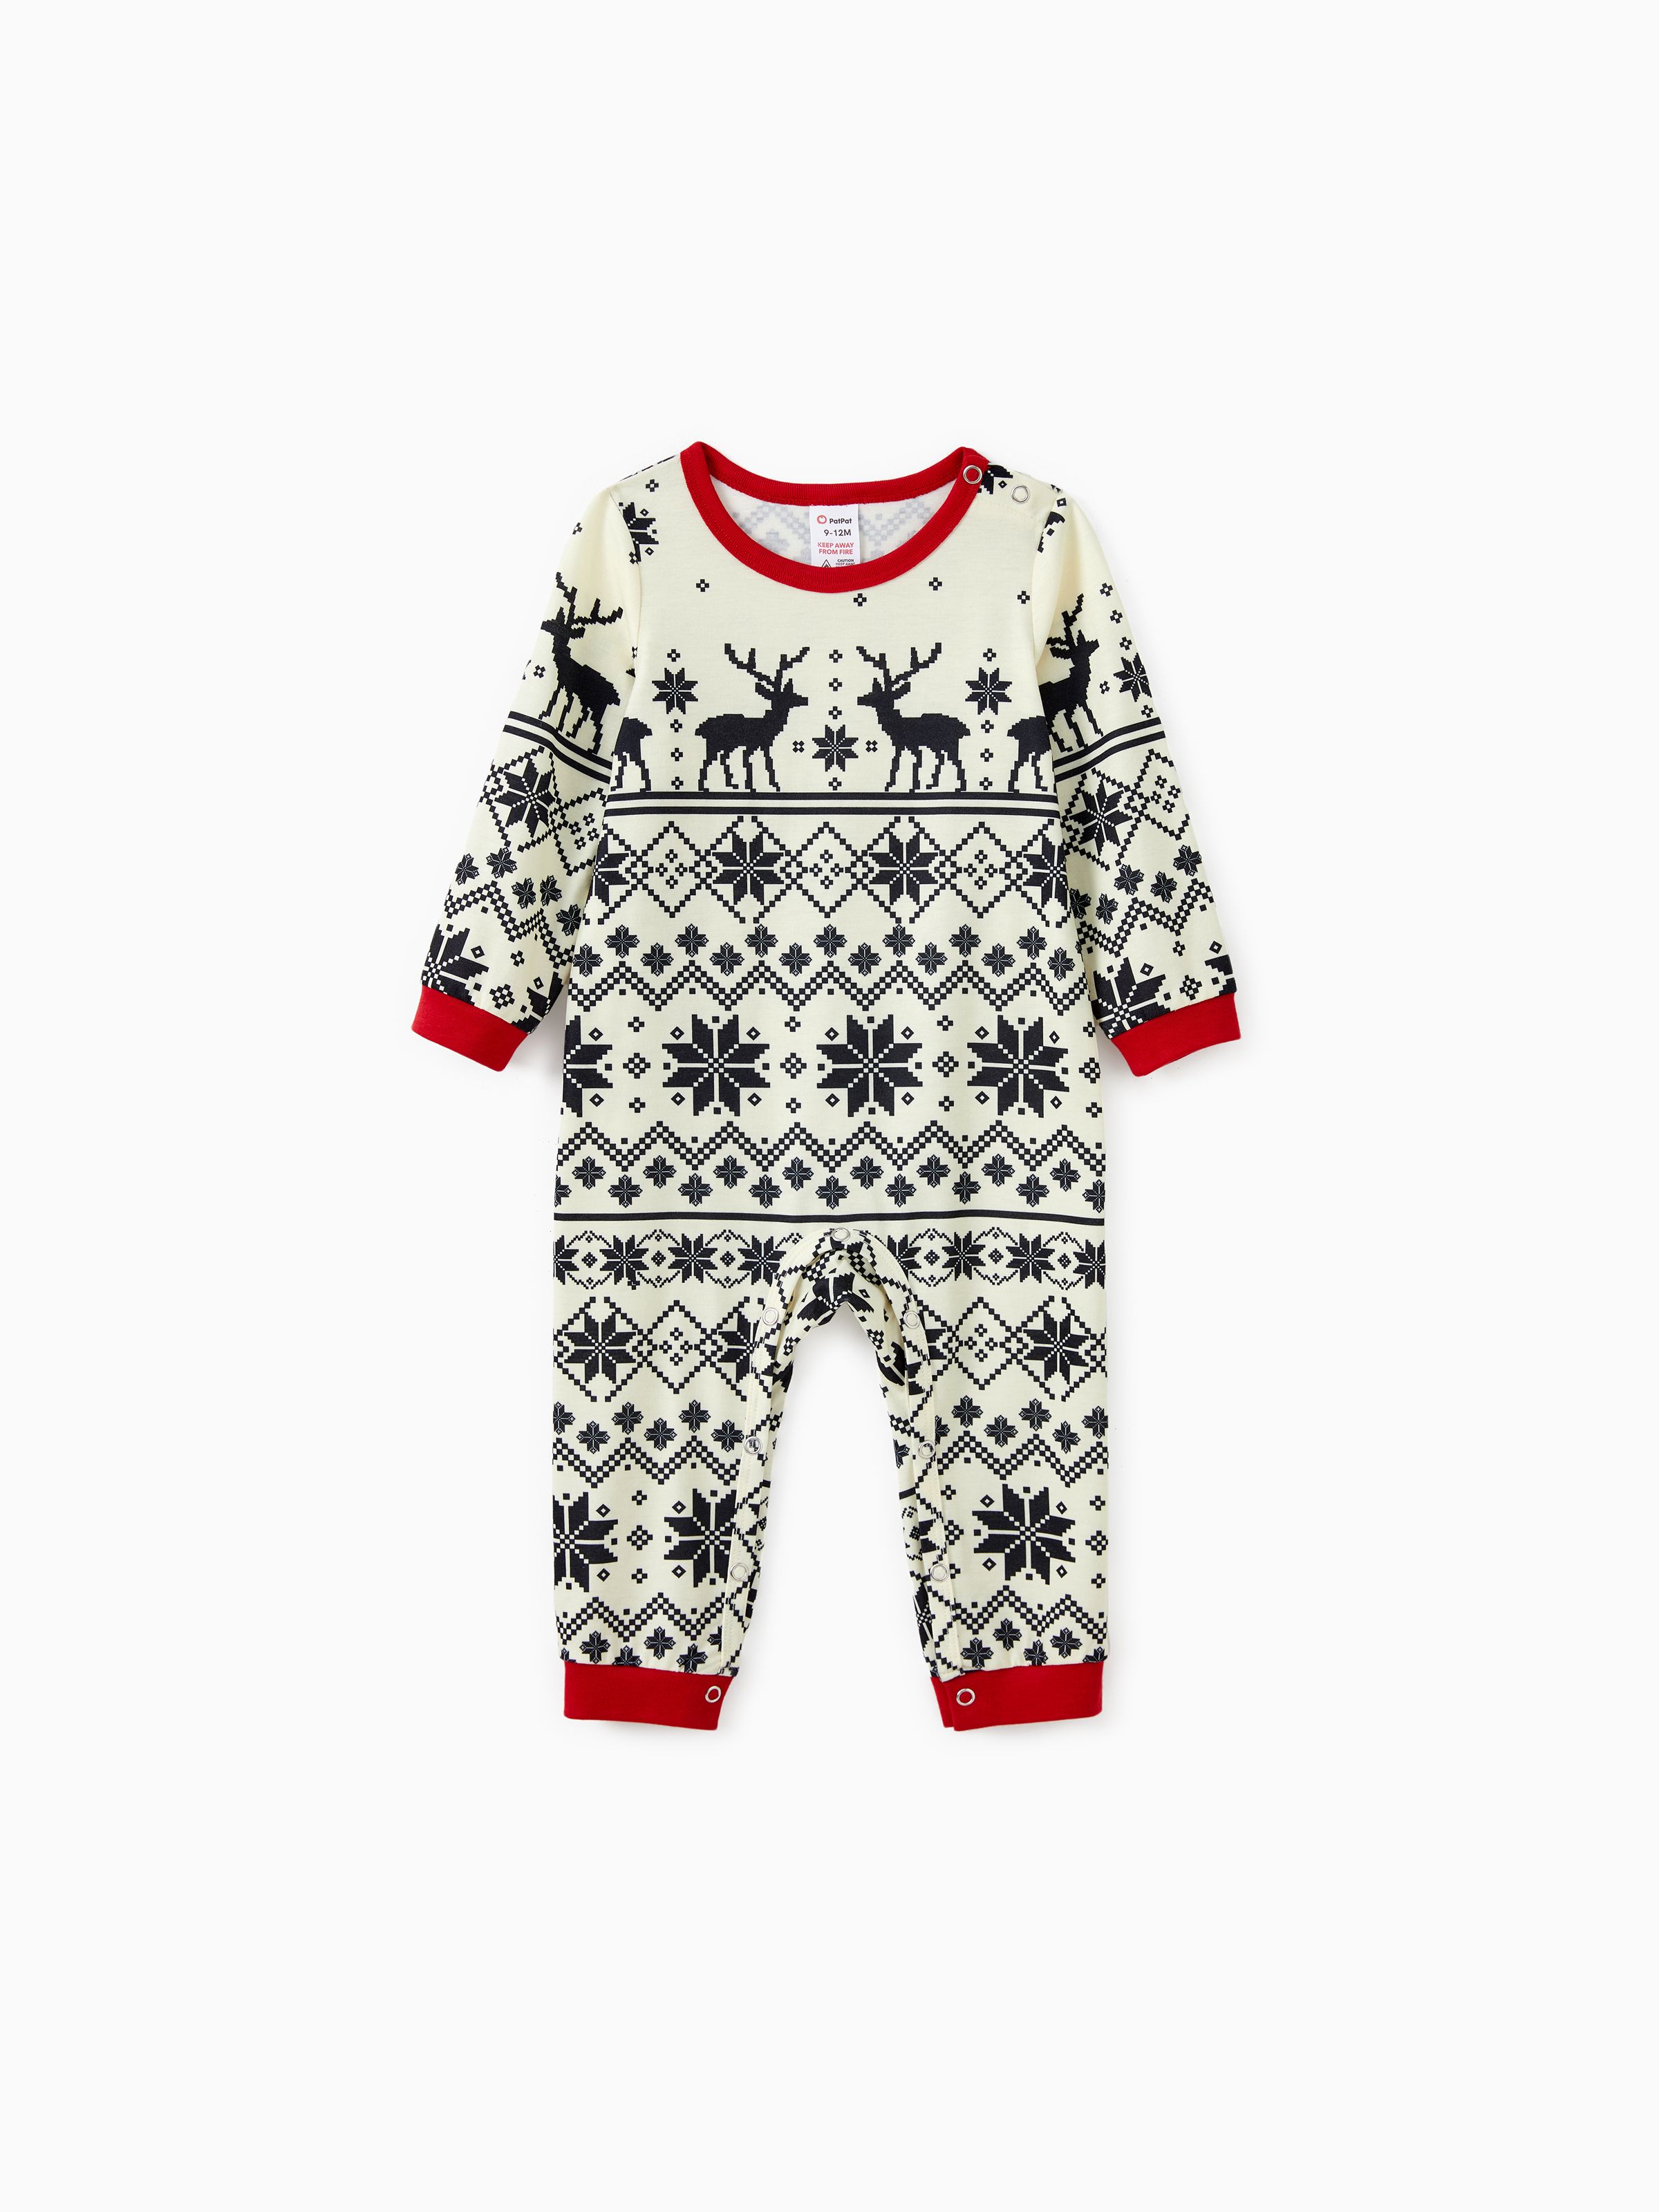 

Christmas Family Matching Snowflake/Reindeer Pattern Pajamas Sets with Pockets and Drawstring ( Flame Resistant )